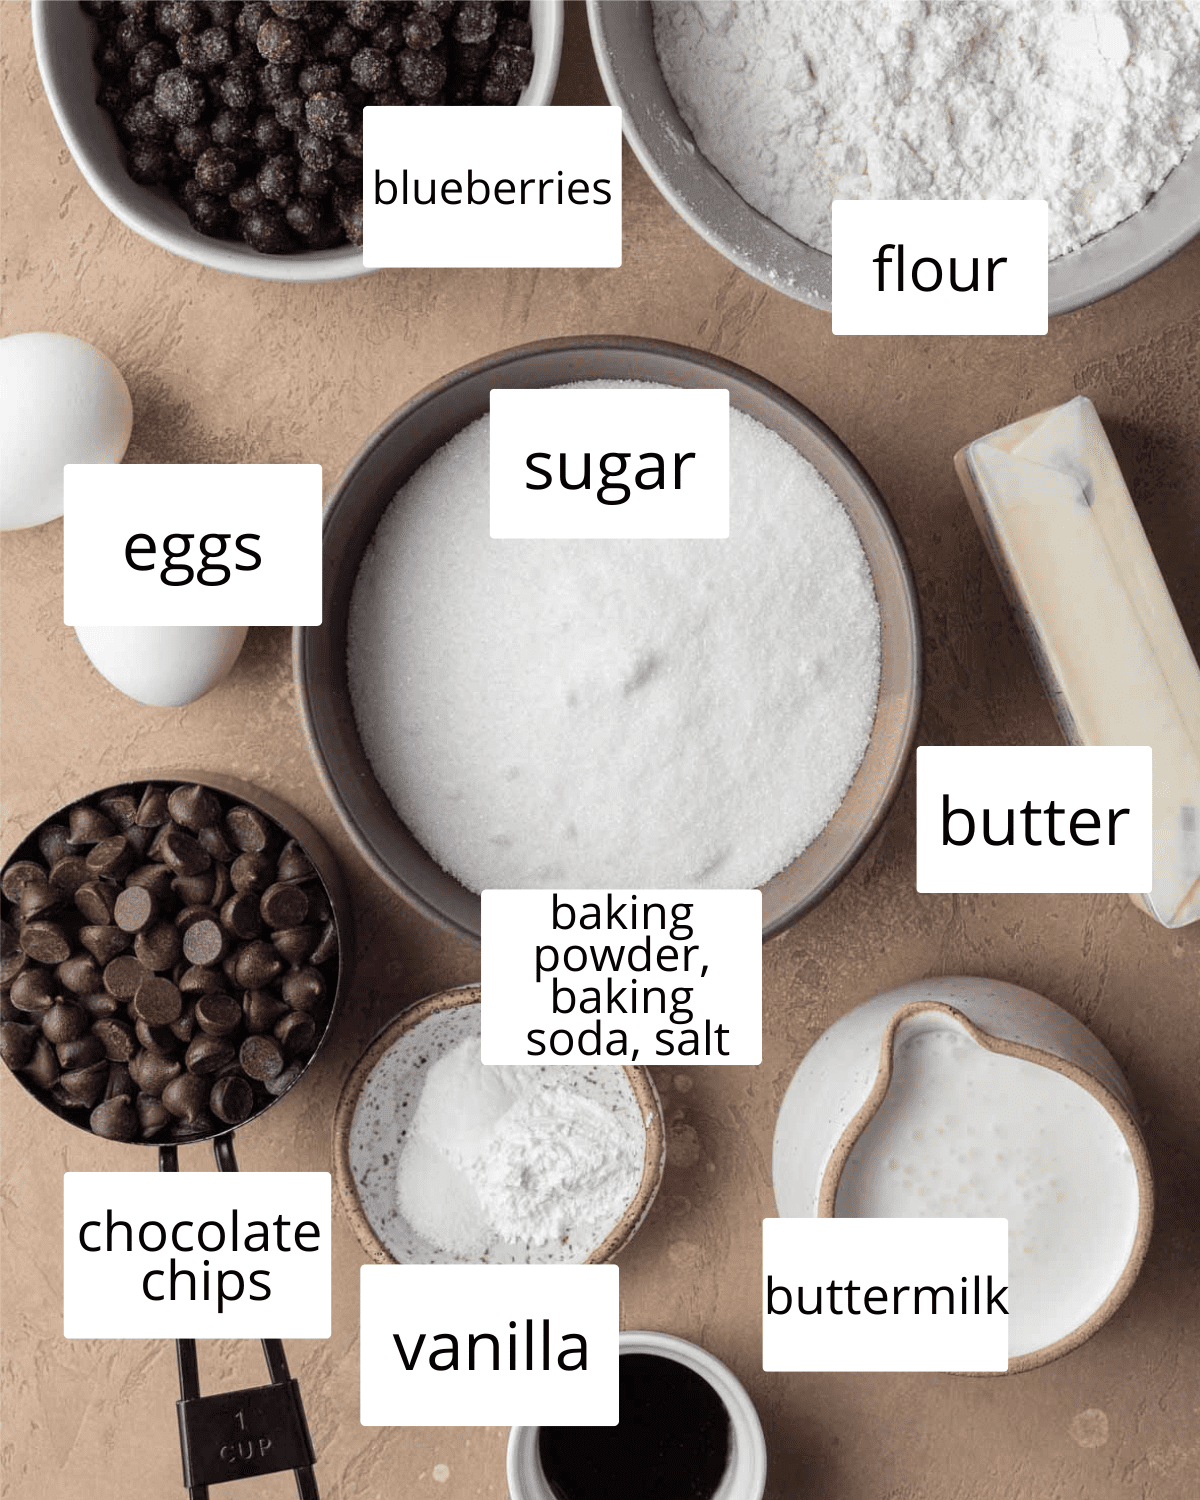 Ingredients to make Blueberry Chocolate Chip Muffins.